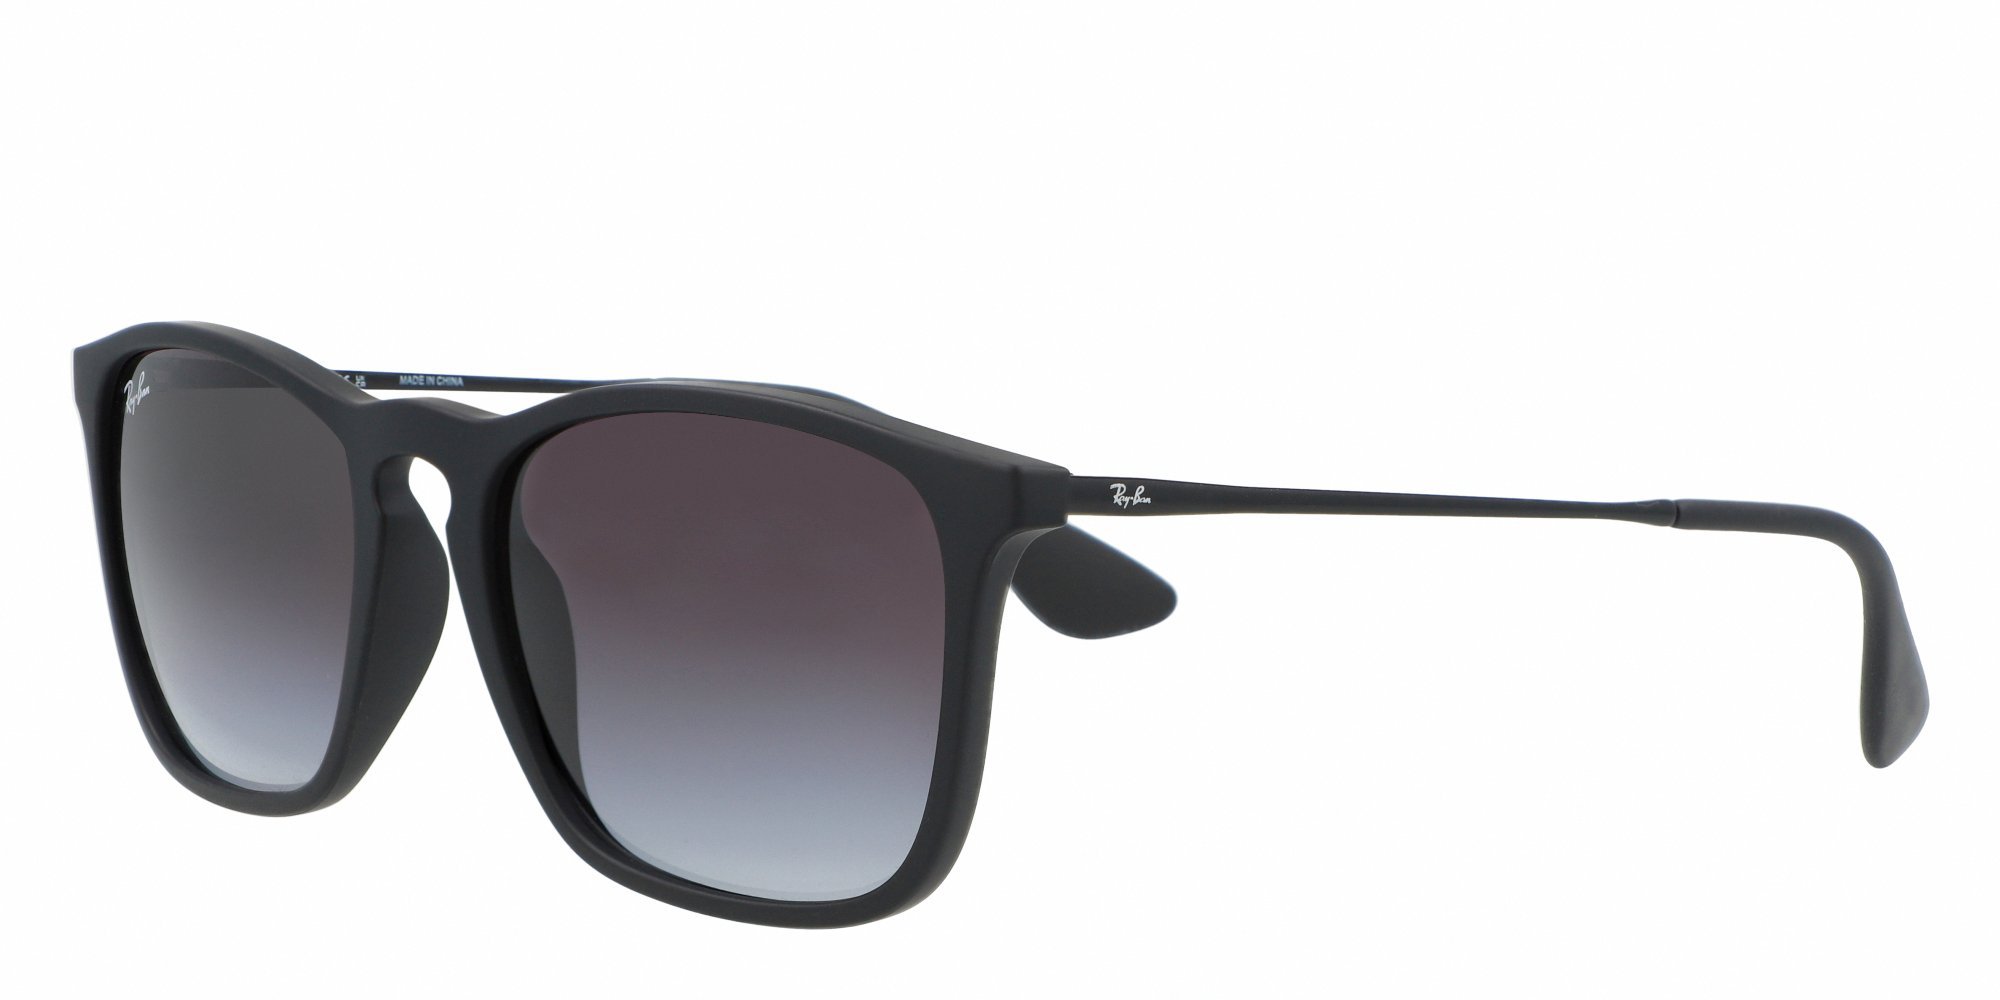 Sunglasses Ray-Ban Chris RB 4187 (622/8G) RB4187 Unisex | Free Shipping  Shop Online